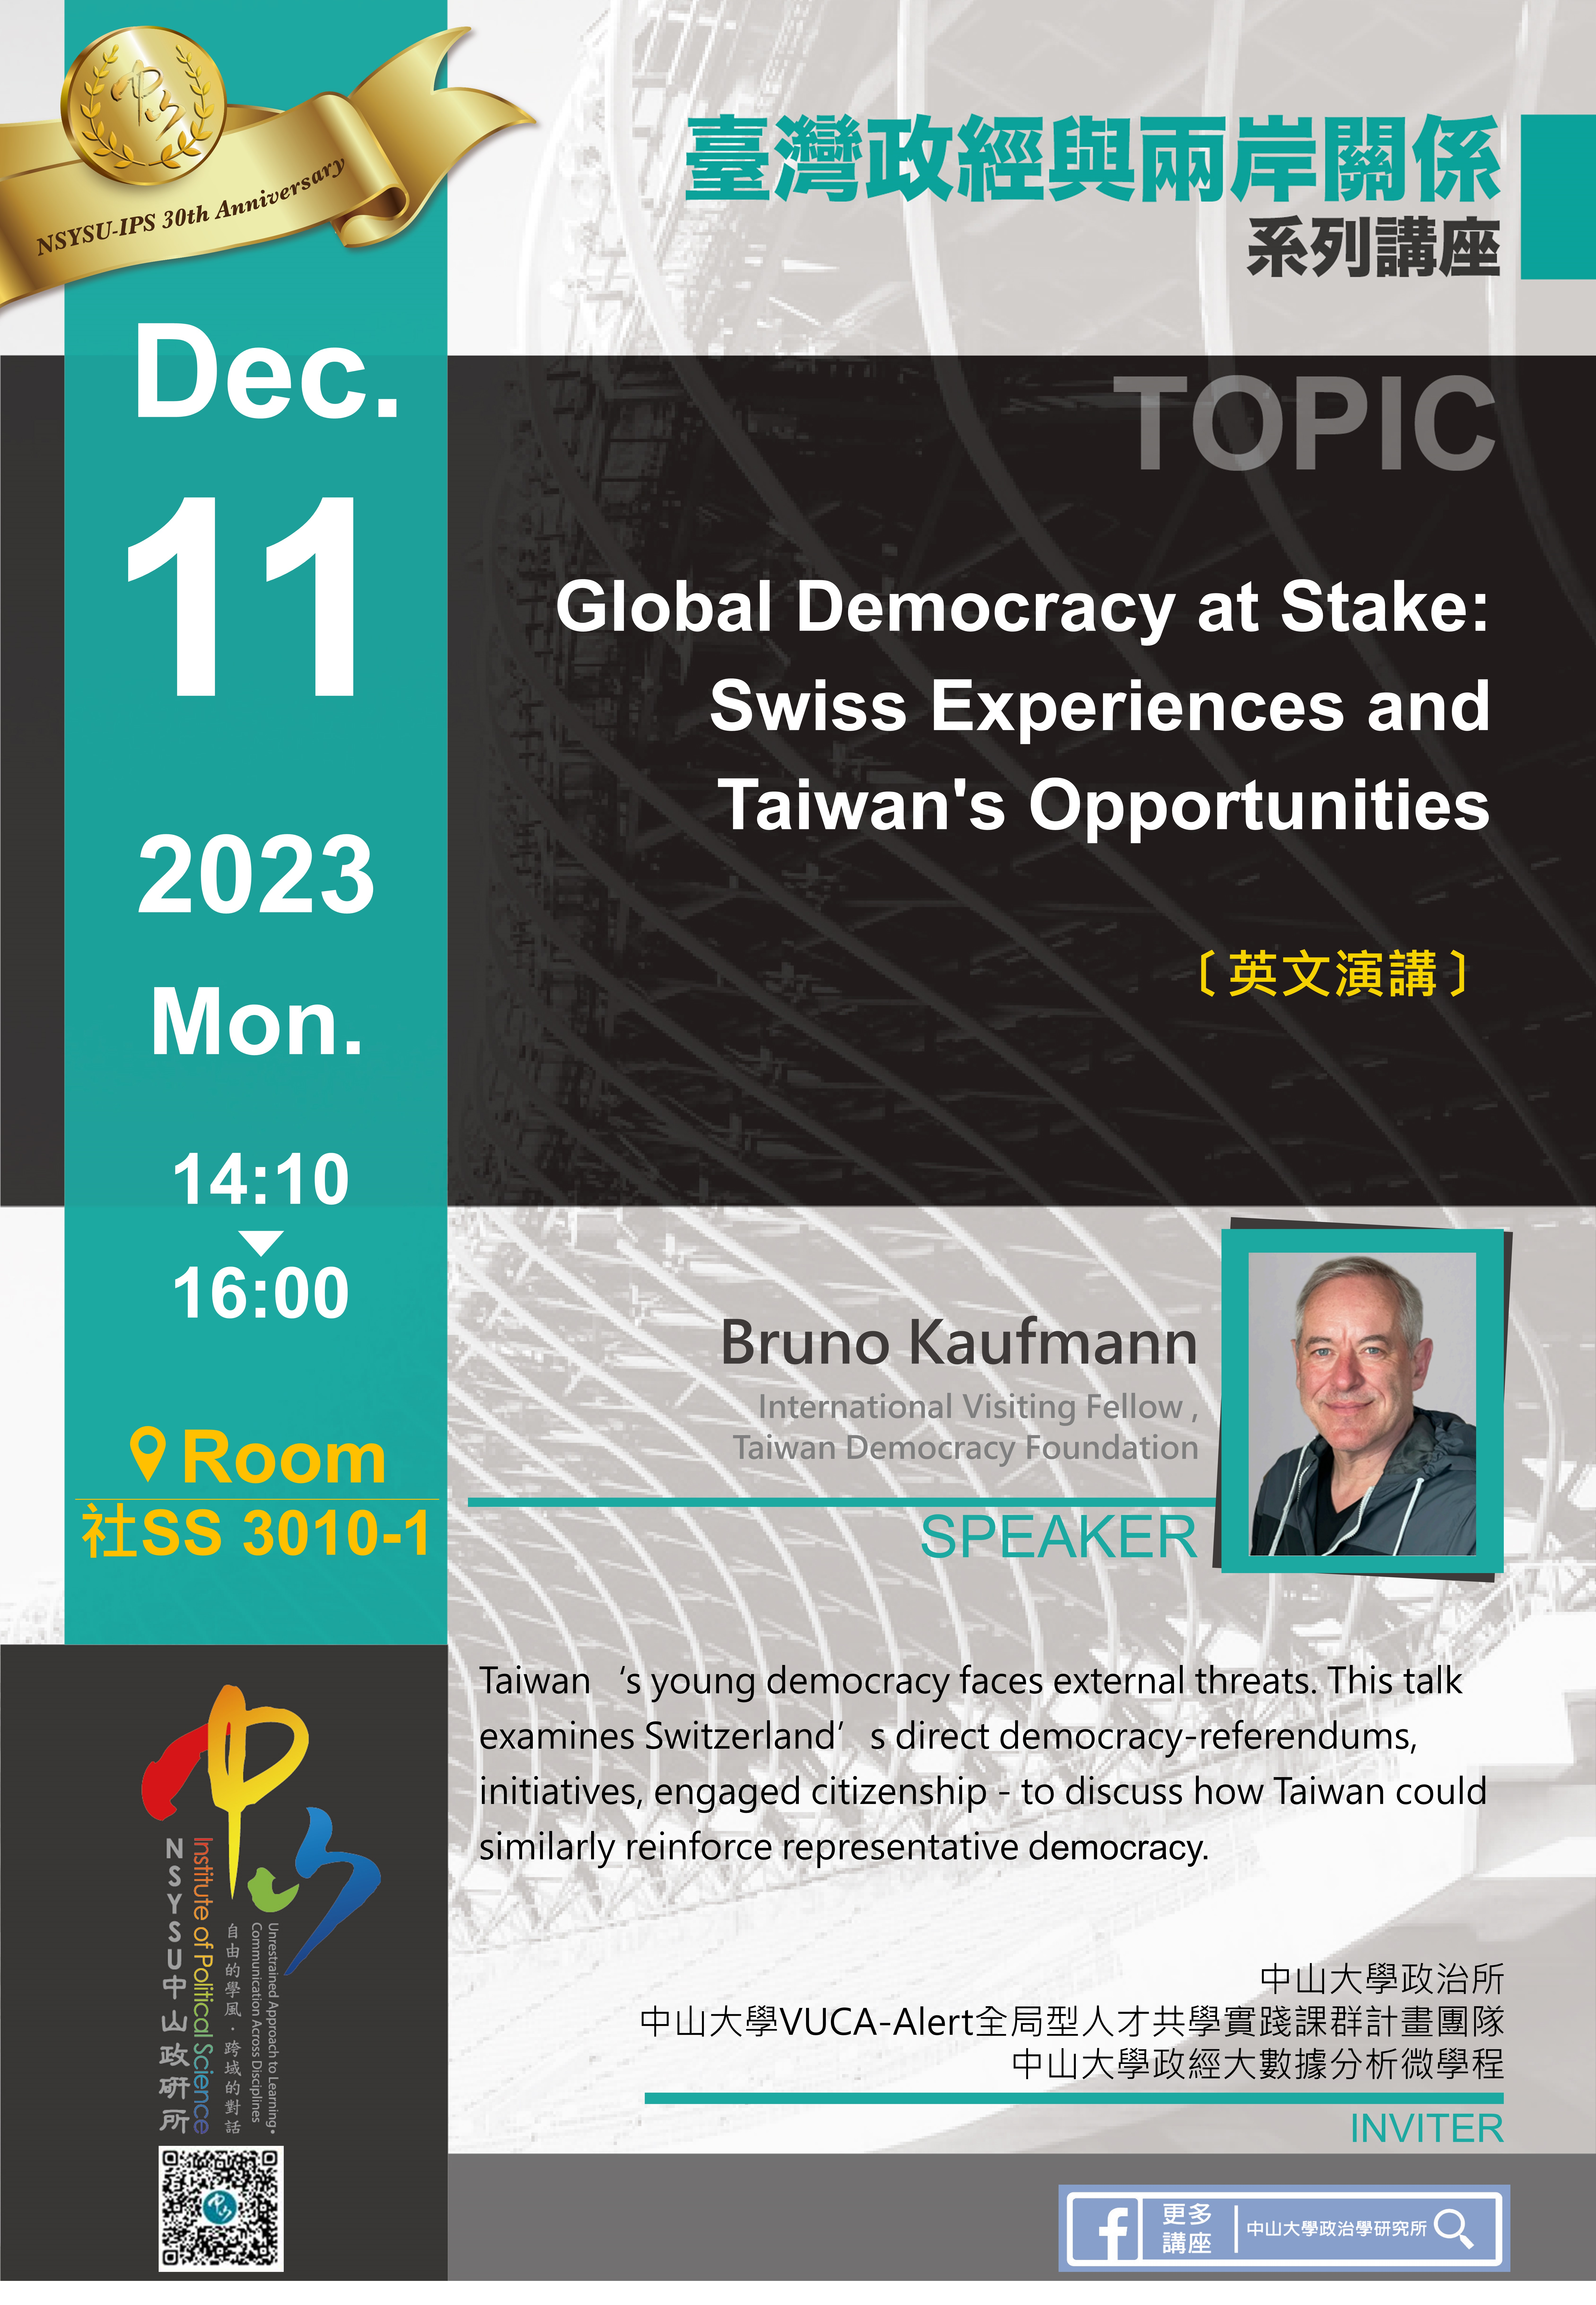 Bruno Kaufmann：Global Democracy at Stake: Swiss Experiences and Taiwan's Opportunities